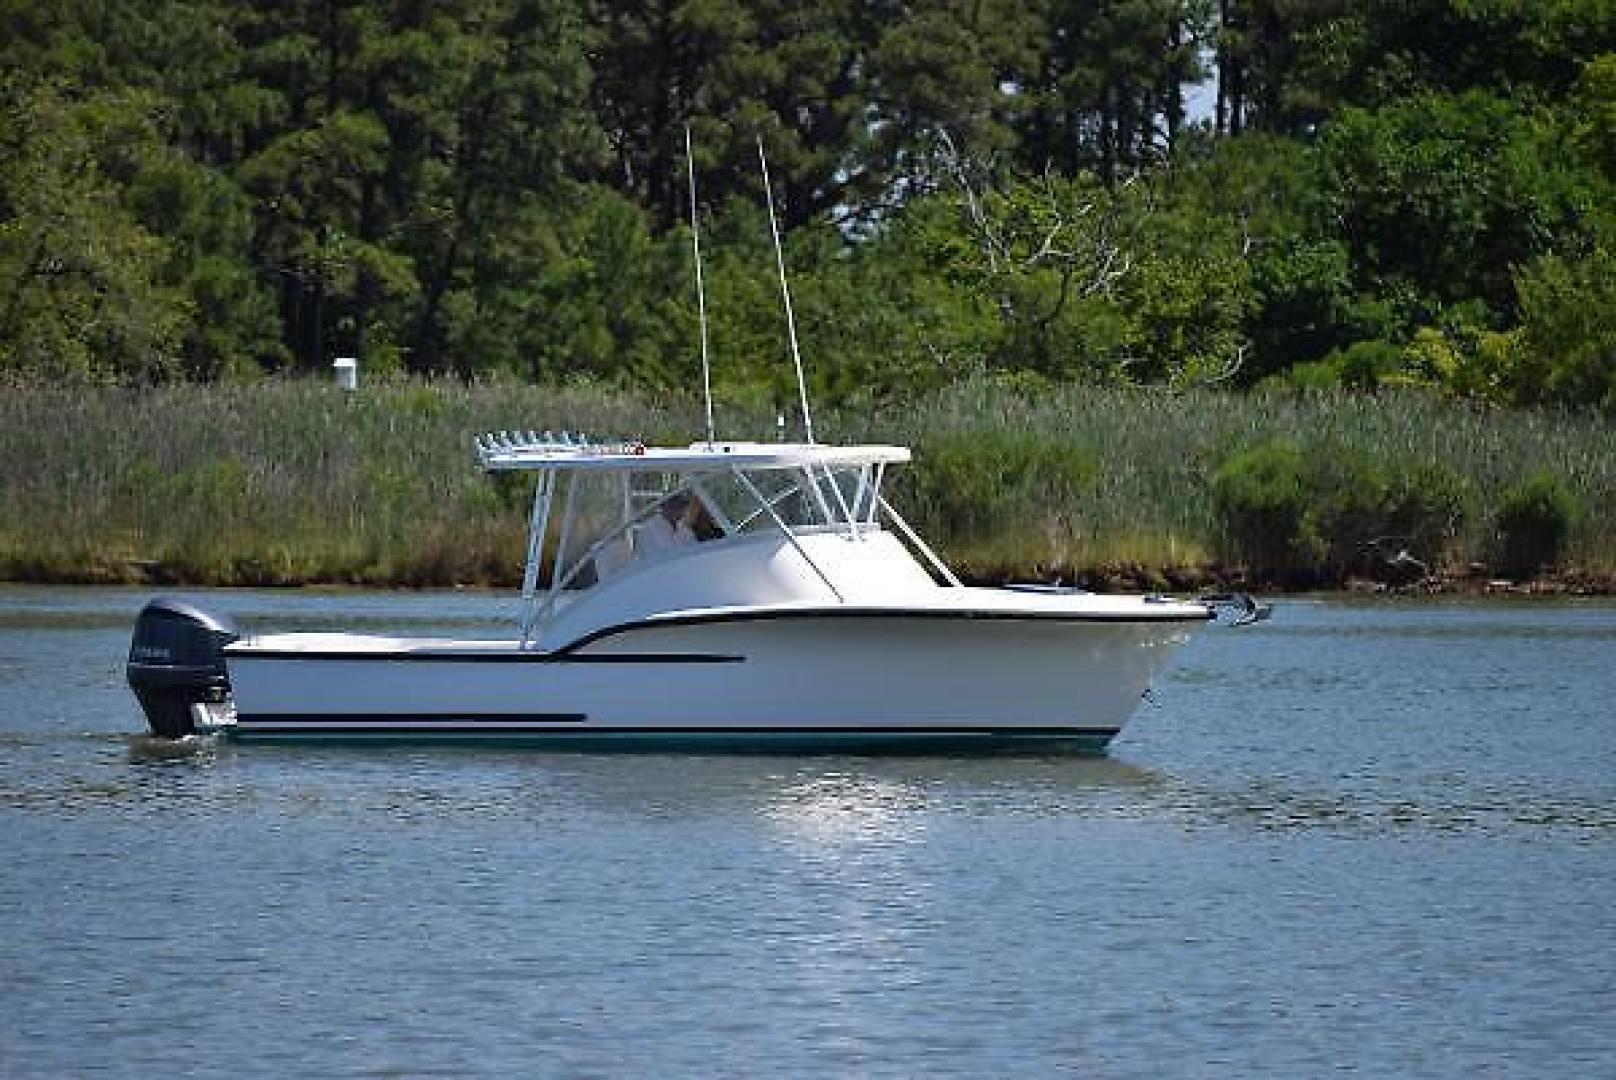 26' Composite Yacht 26 Express